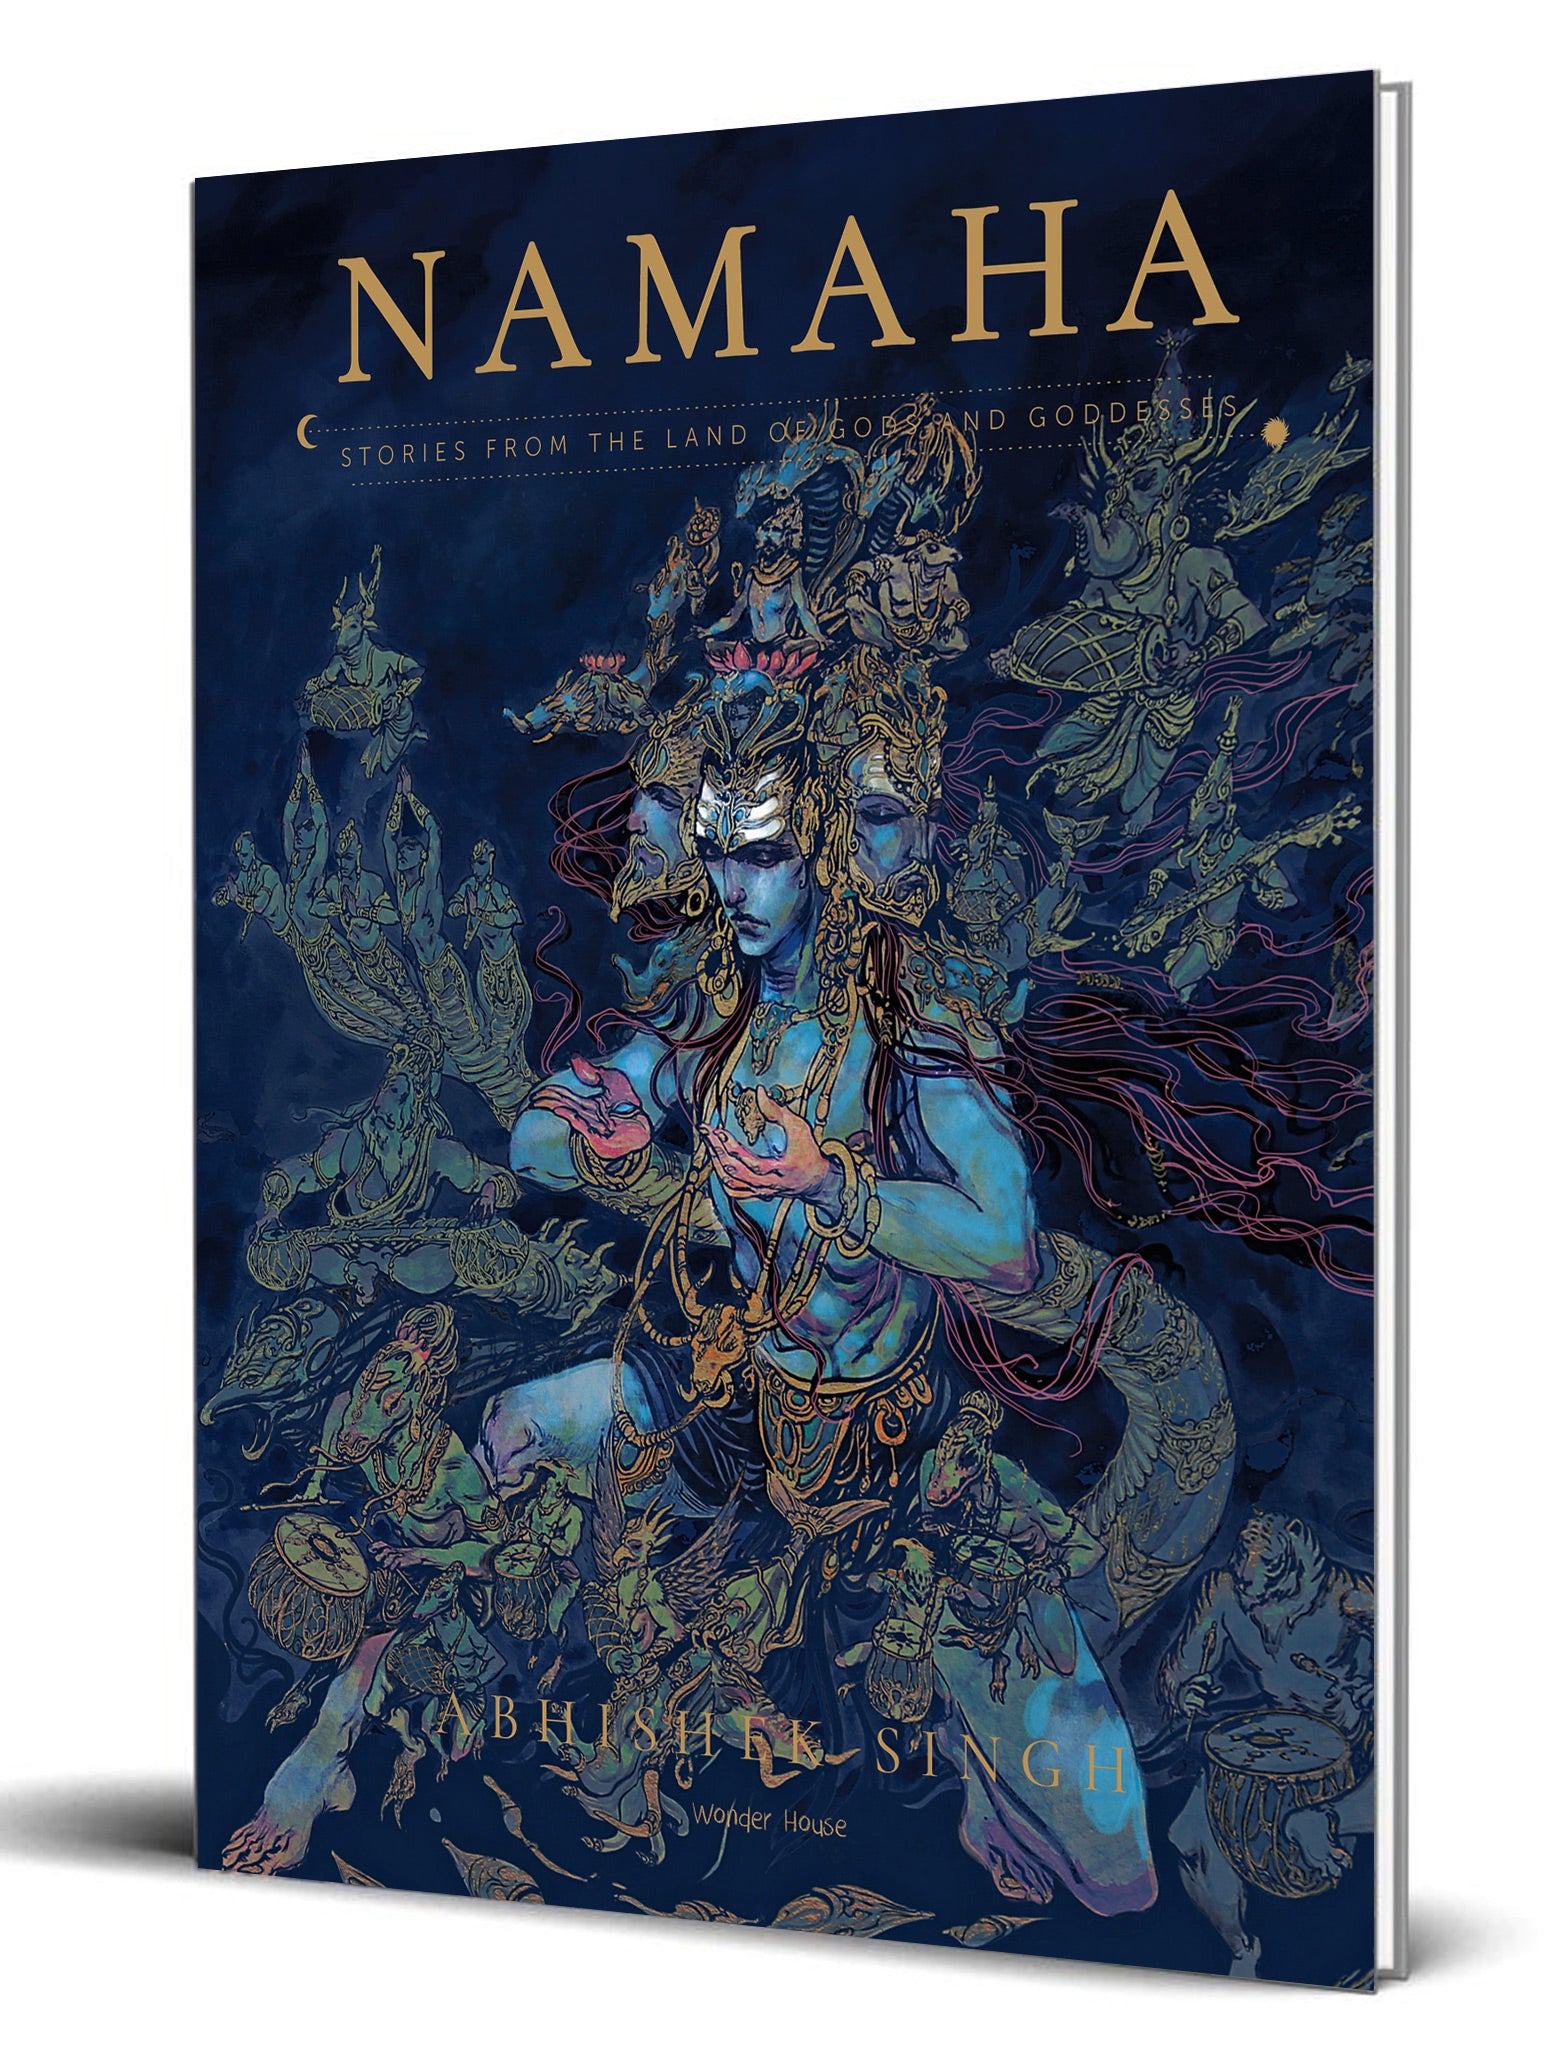 Namaha - Stories From The Land of Gods And Goddesses: Illustrated Stories Hardcover Edition Special Print